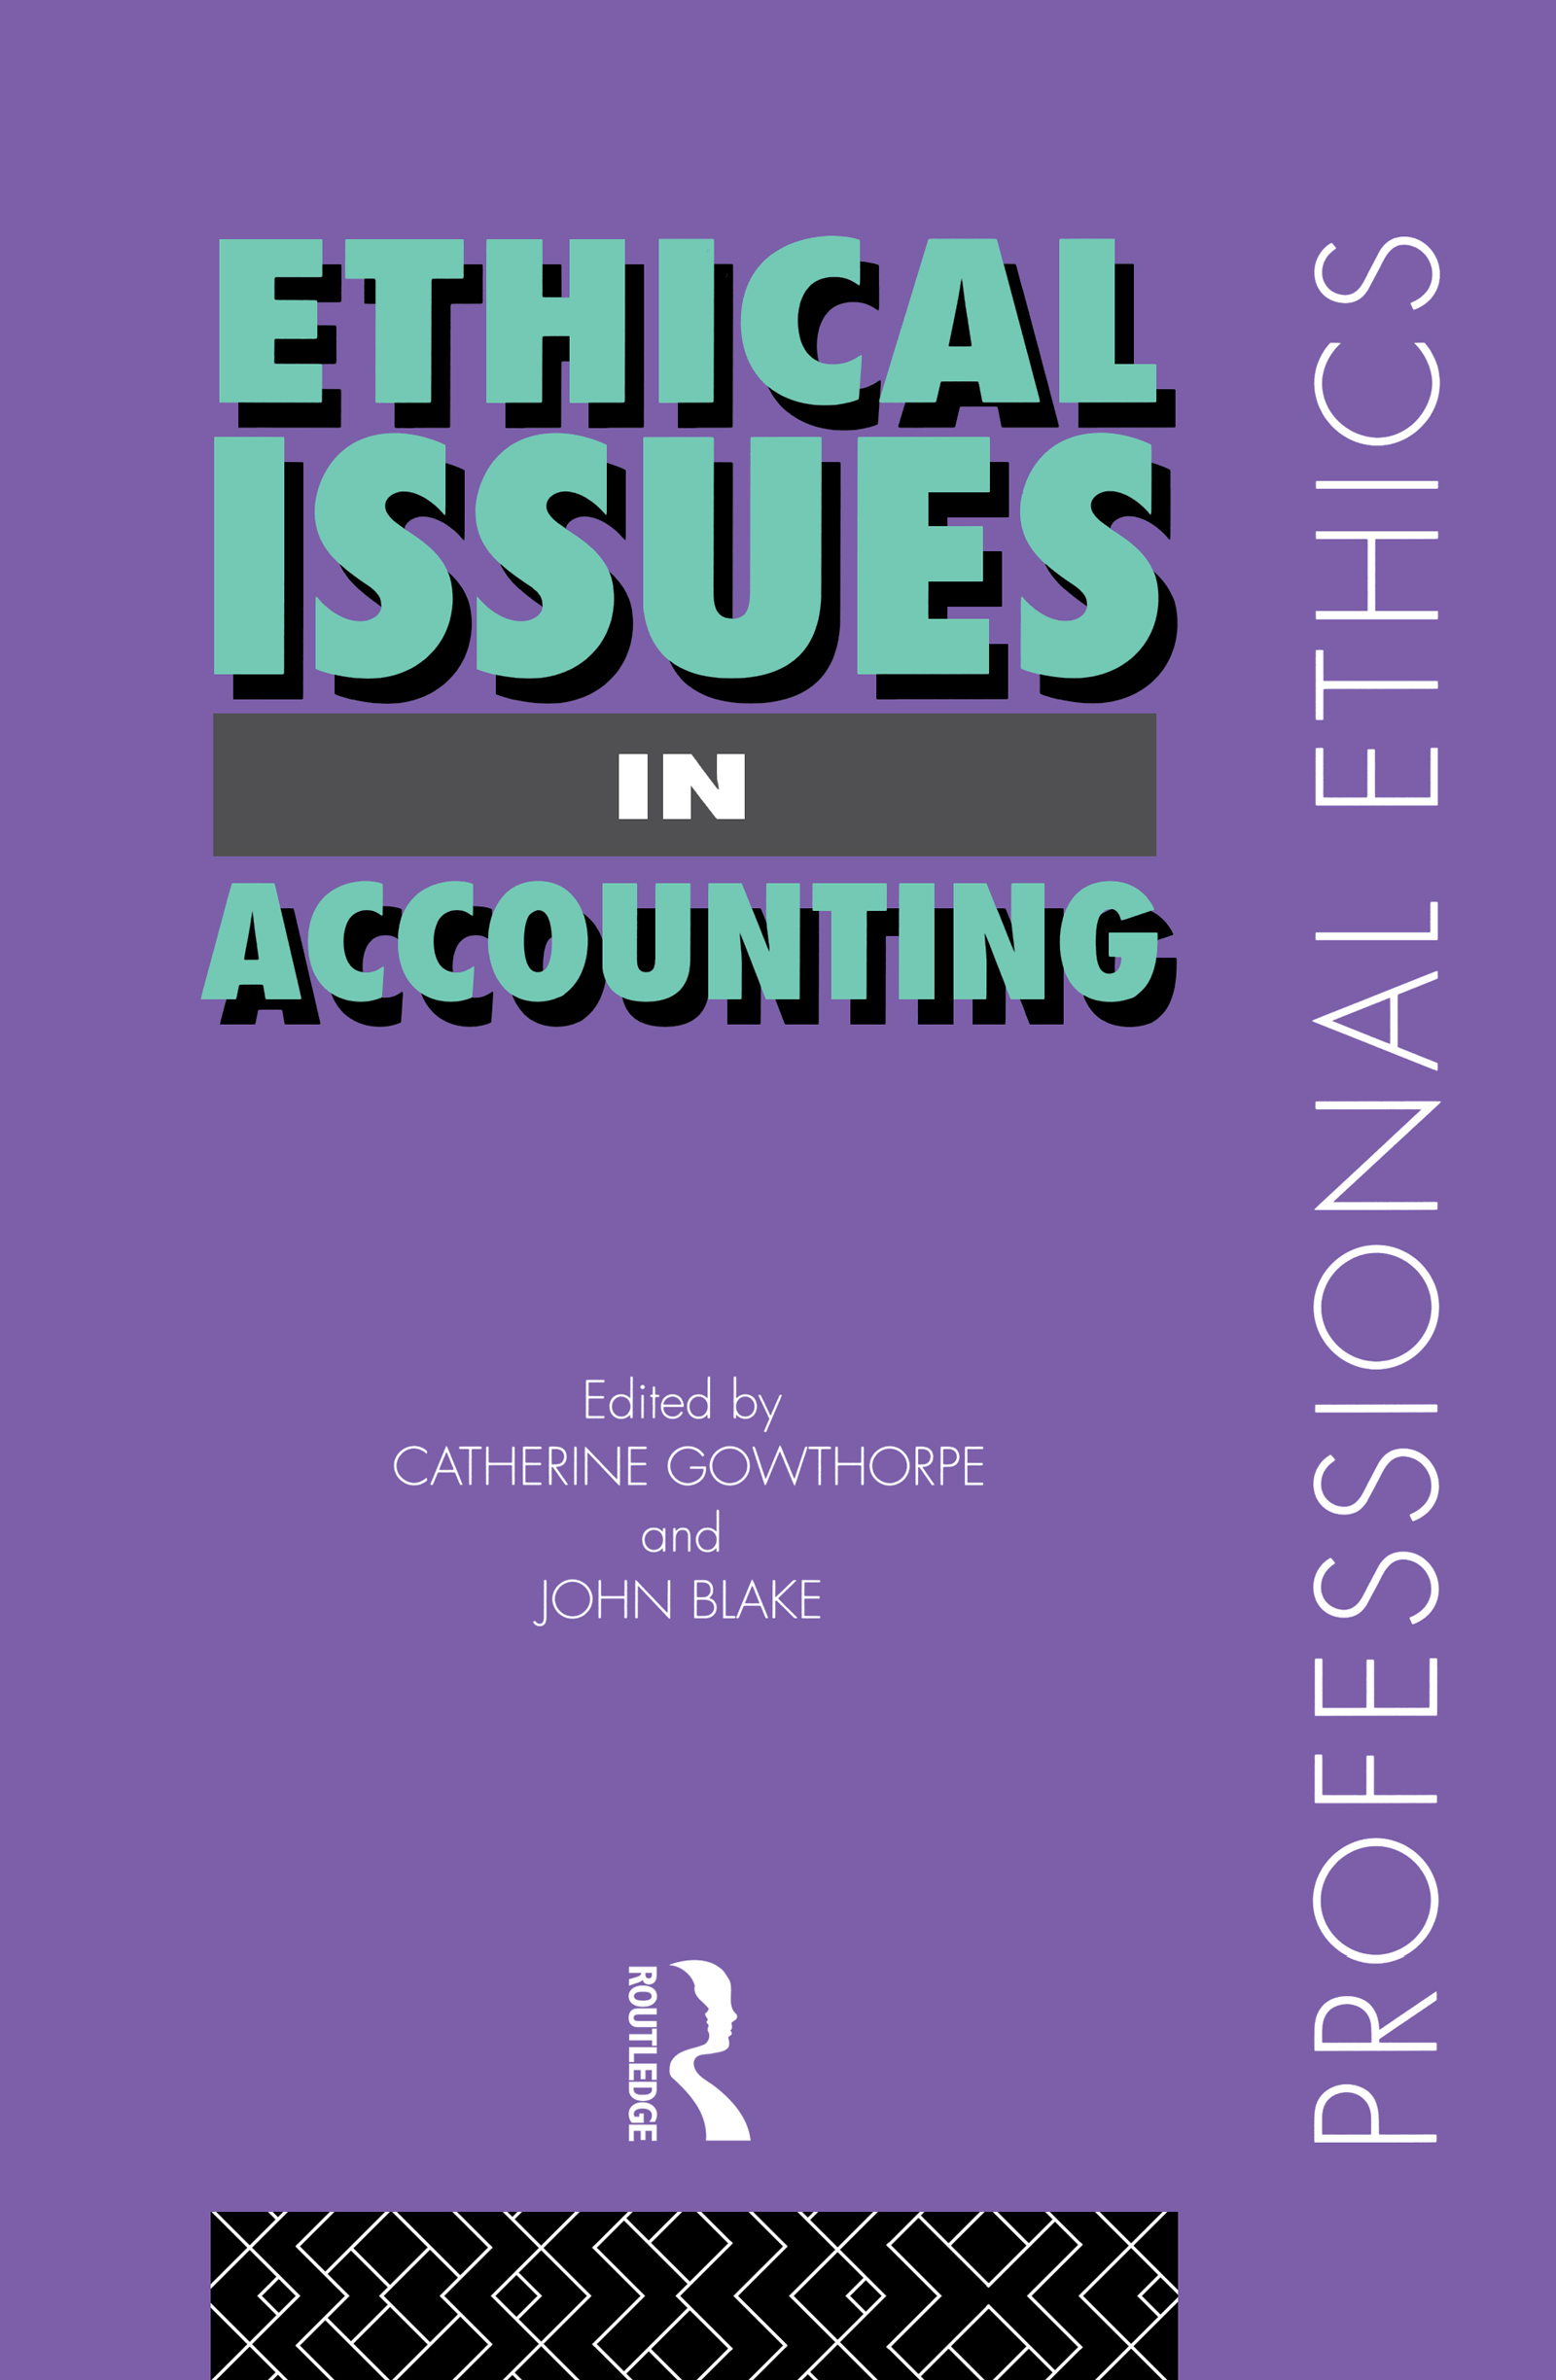 Ethical Issues in Accounting - Blake, John Pilkington, Catherine Gowthorpe, Catherine